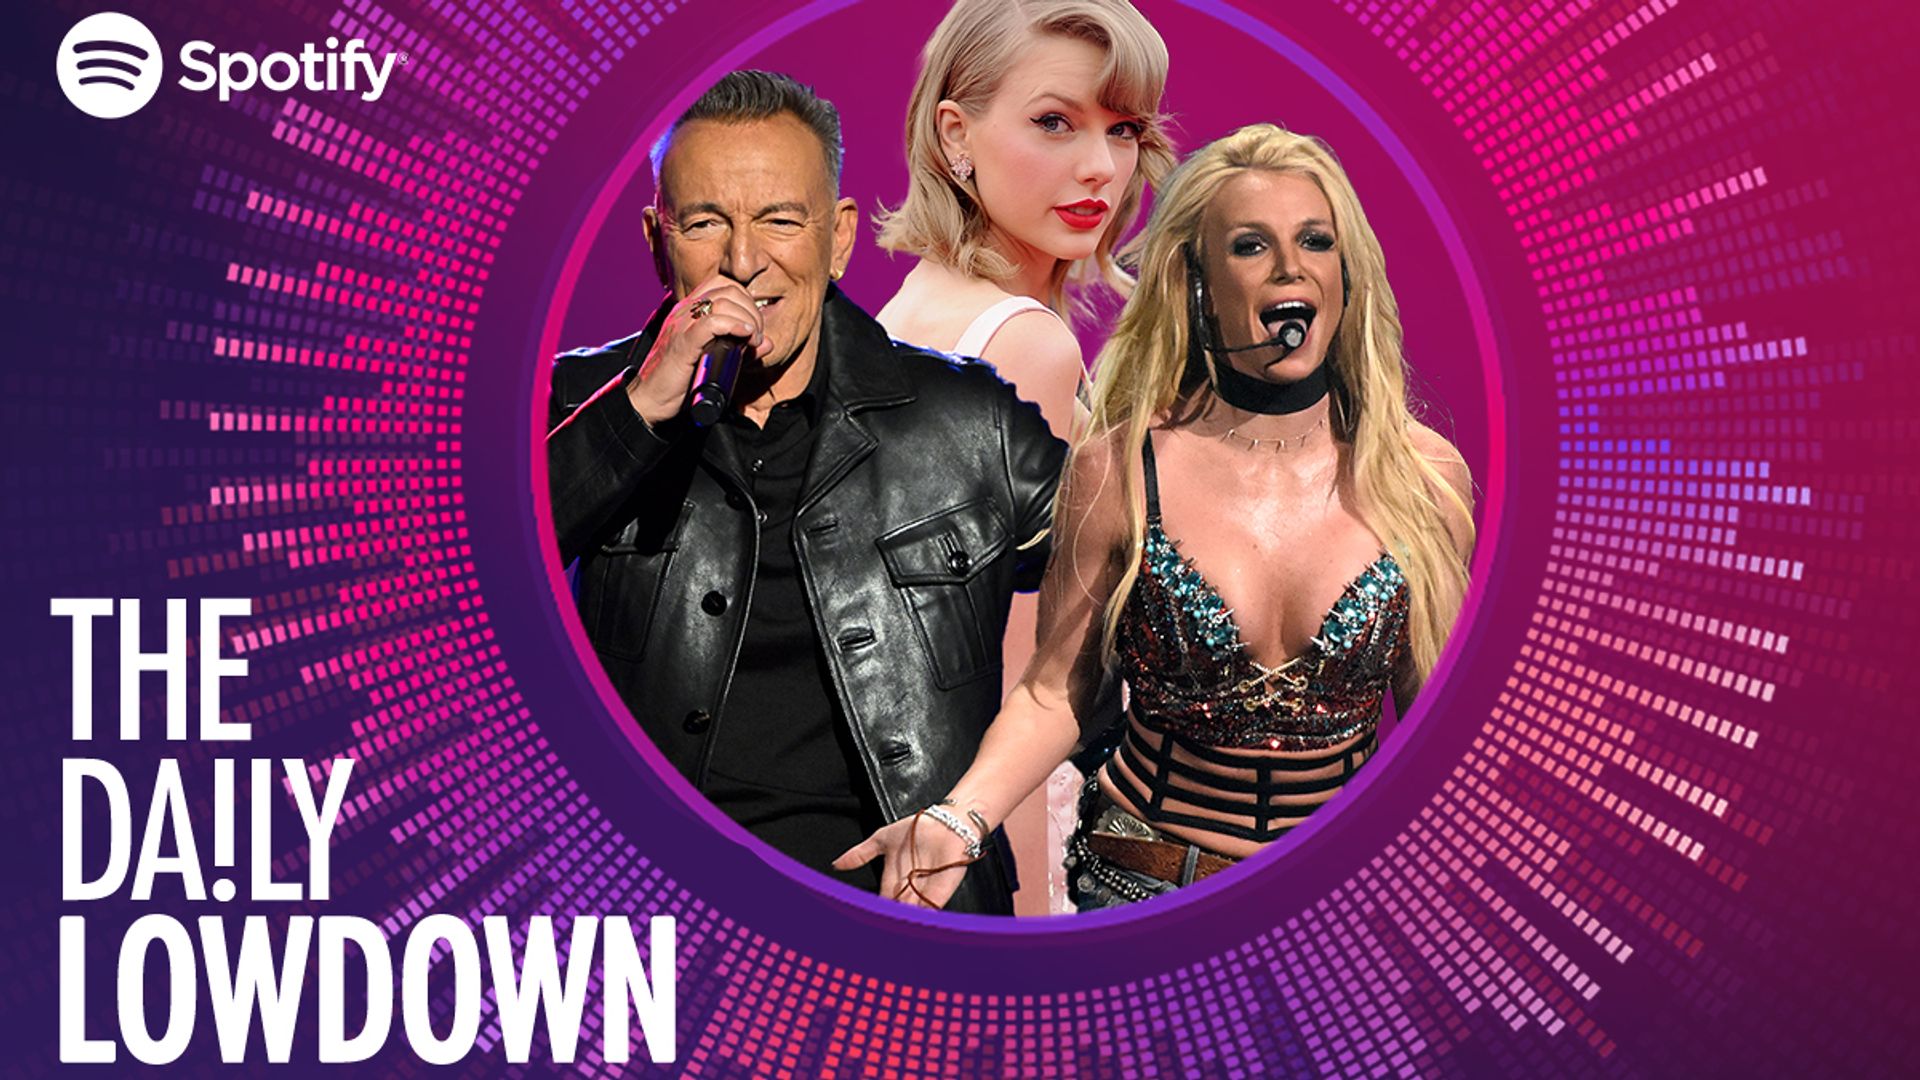 Daily Lowdown logo showing Bruce Springsteen, Britney Spears and Taylor Swift